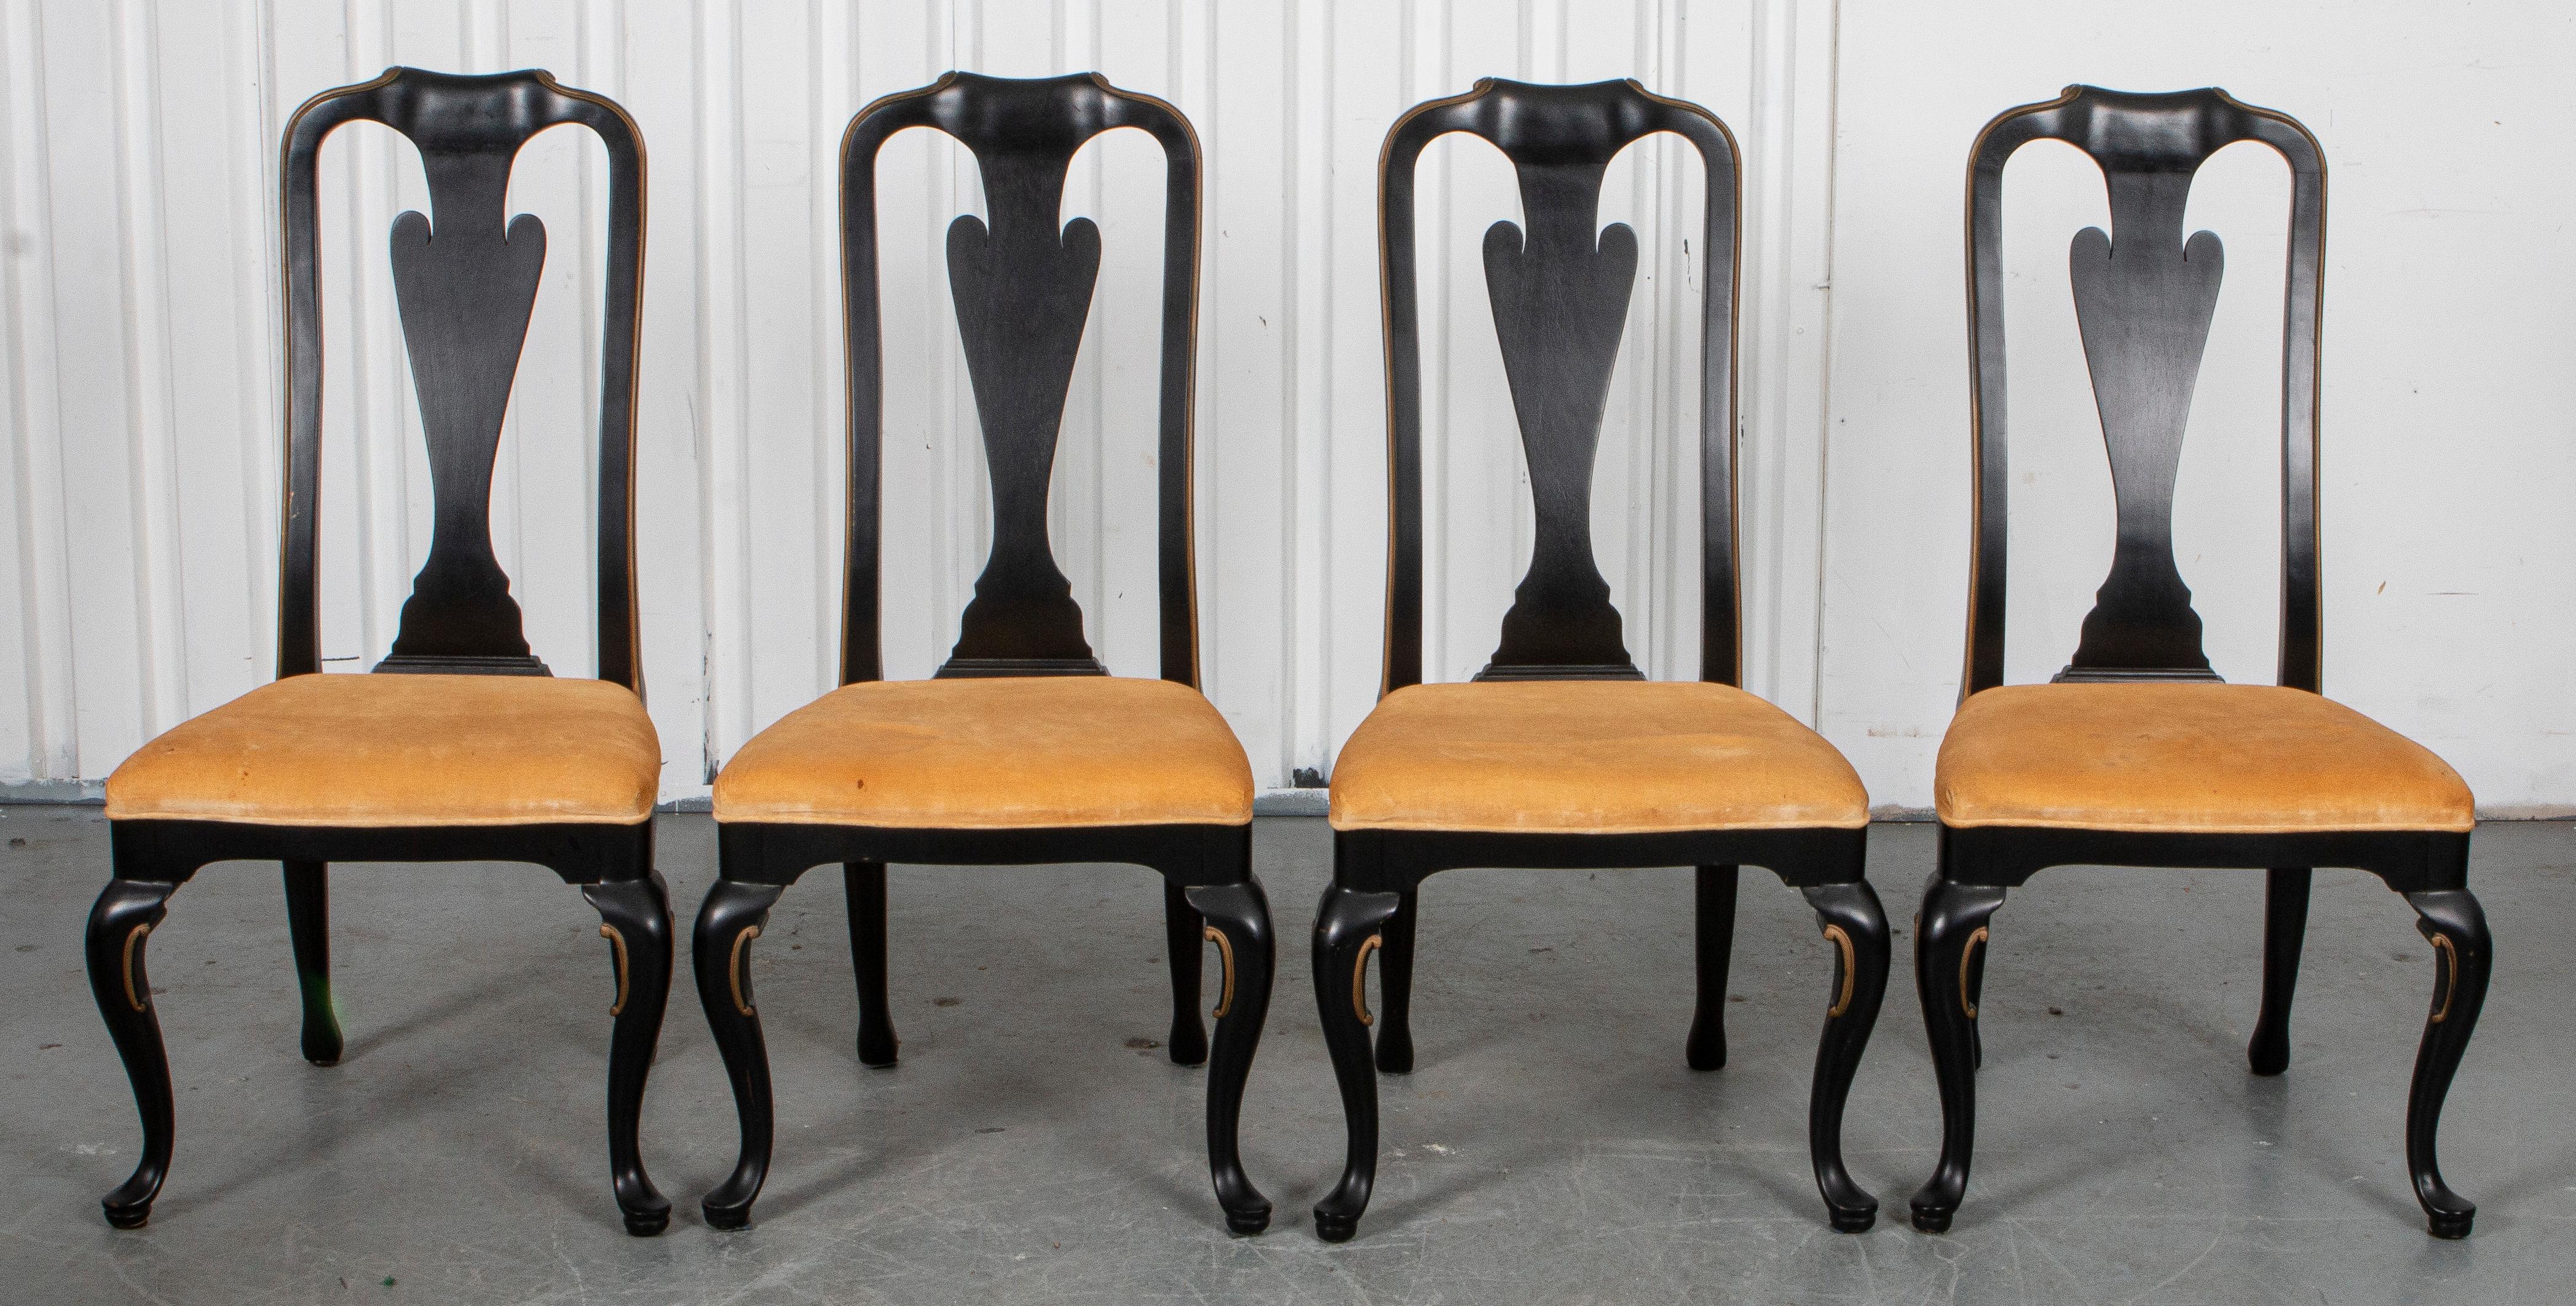 Four Queen Anne style ebonized side chairs with Rococo details and gilt accents around velvet seats, possibly Widdicomb. Measures: 43” H x 22” W x 25” D.